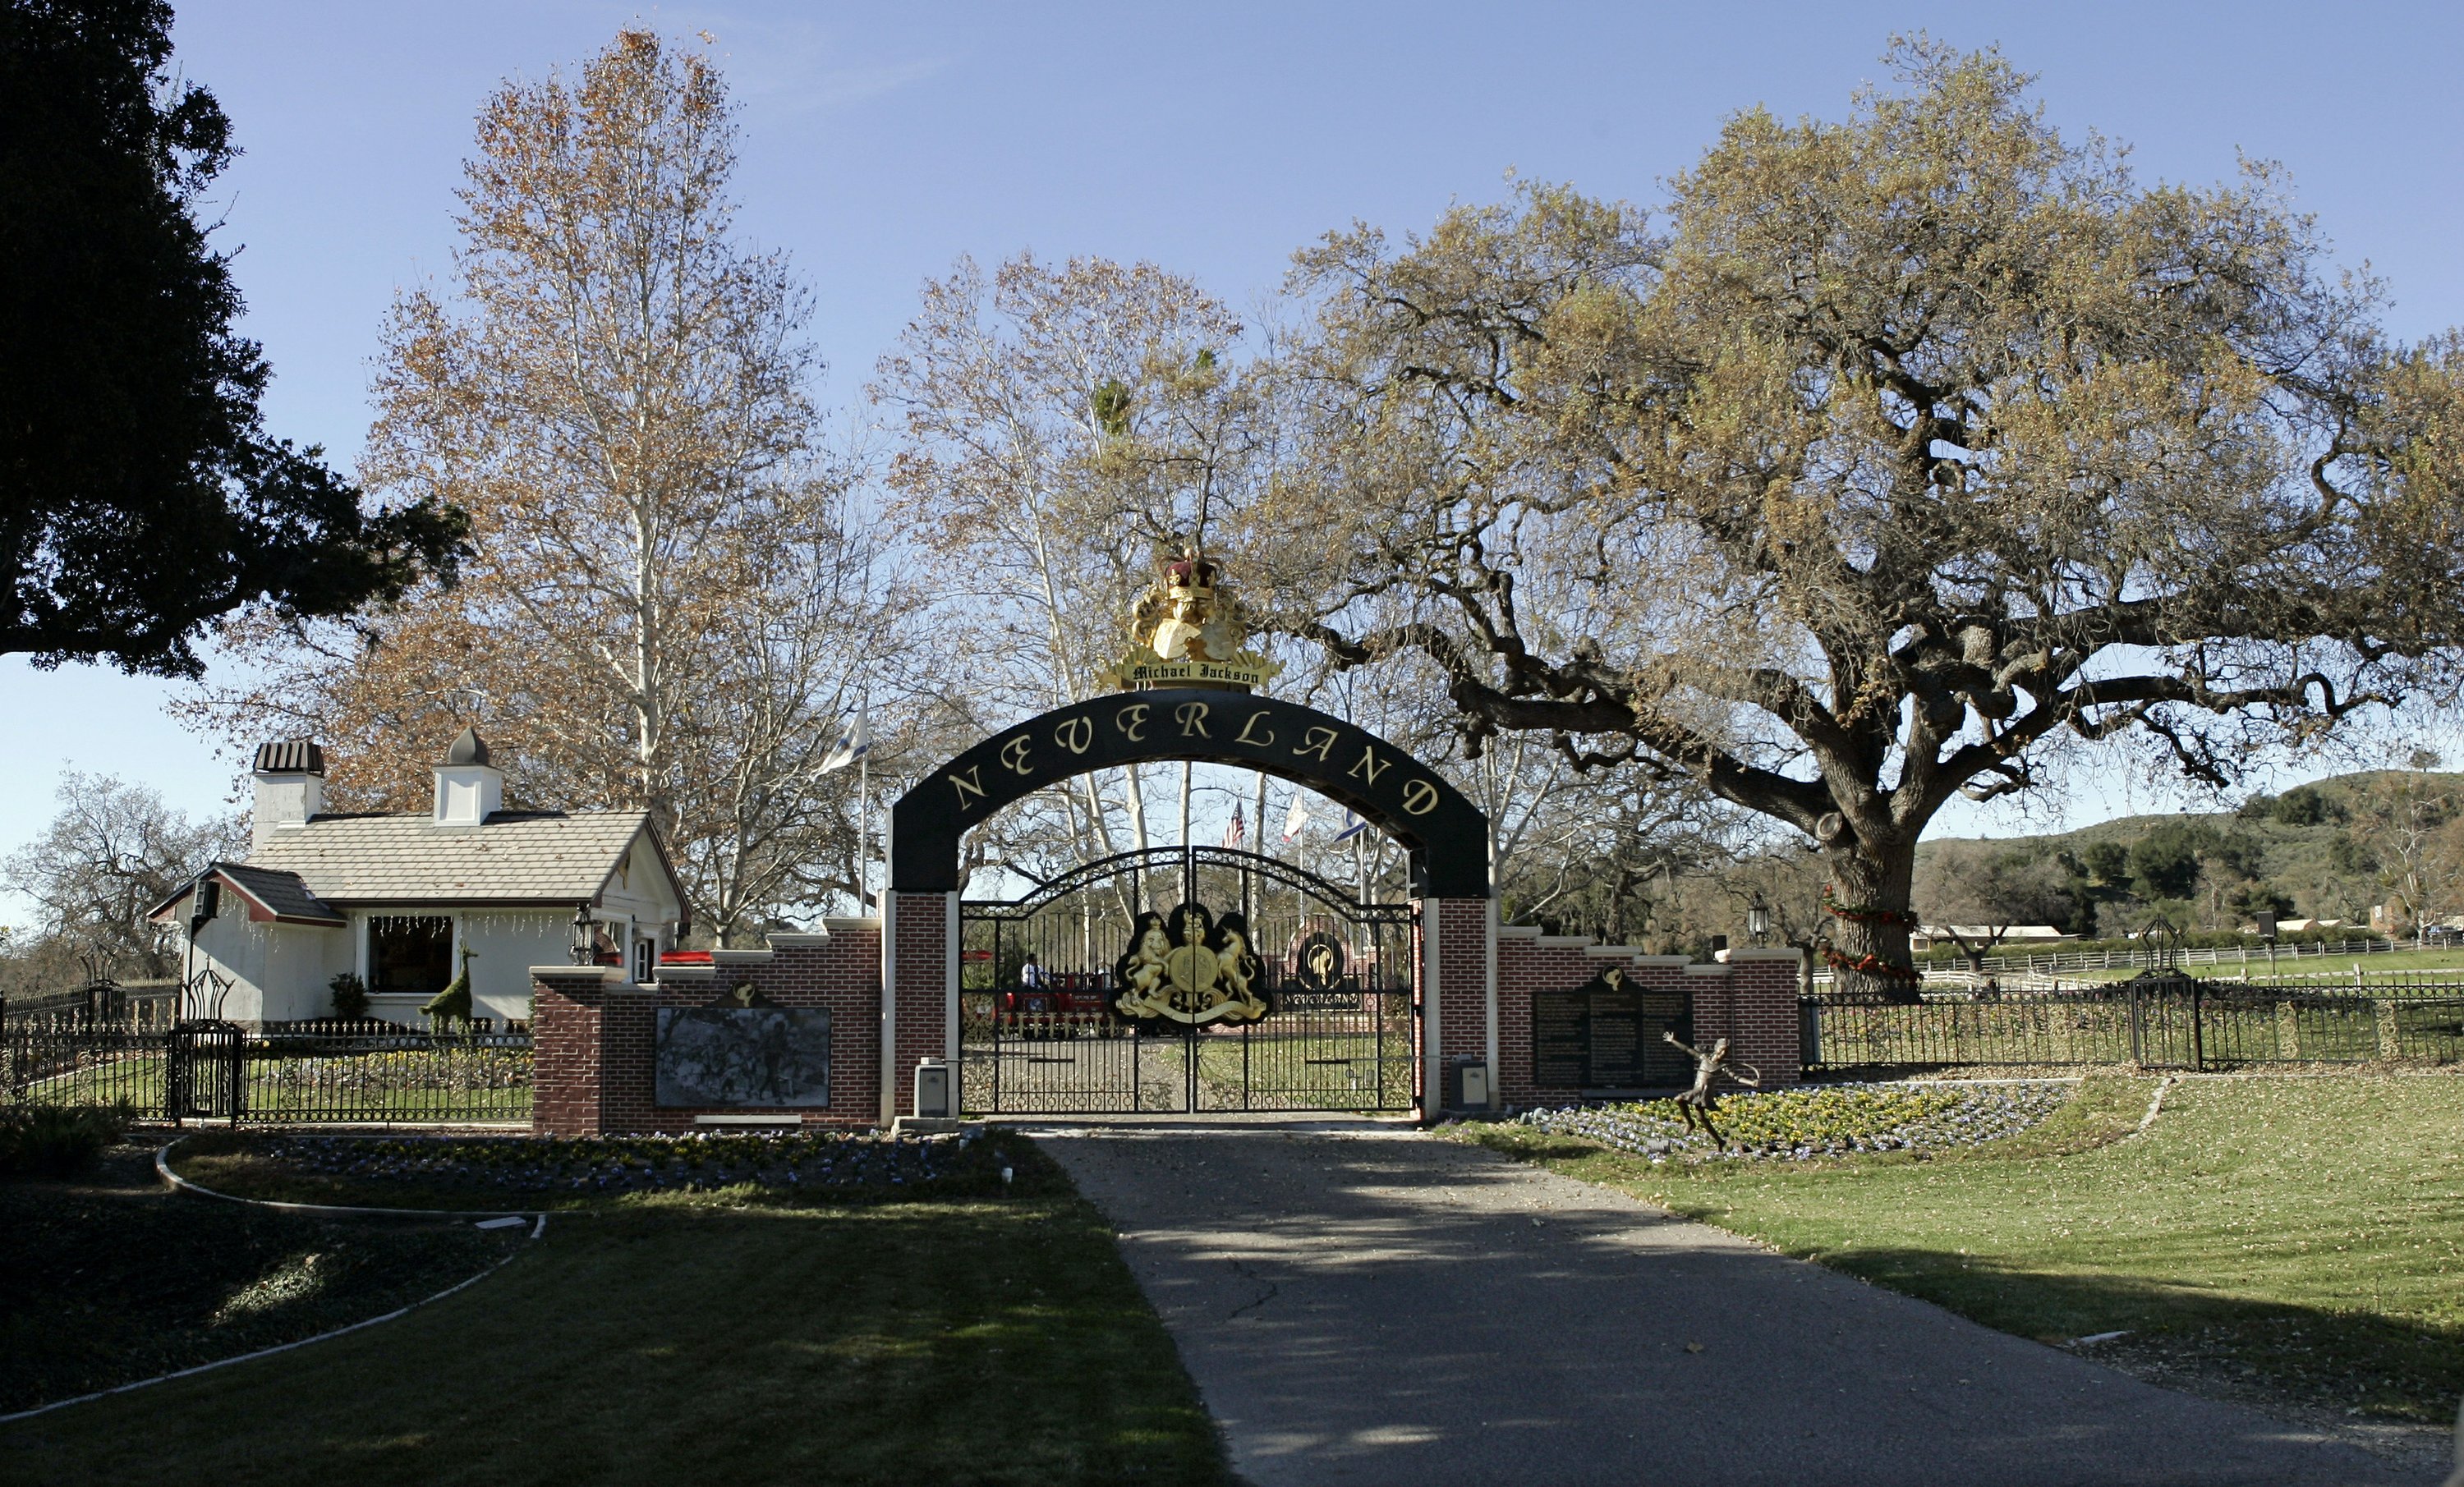 Michael Jackson’s Neverland Ranch was sold to the billionaire